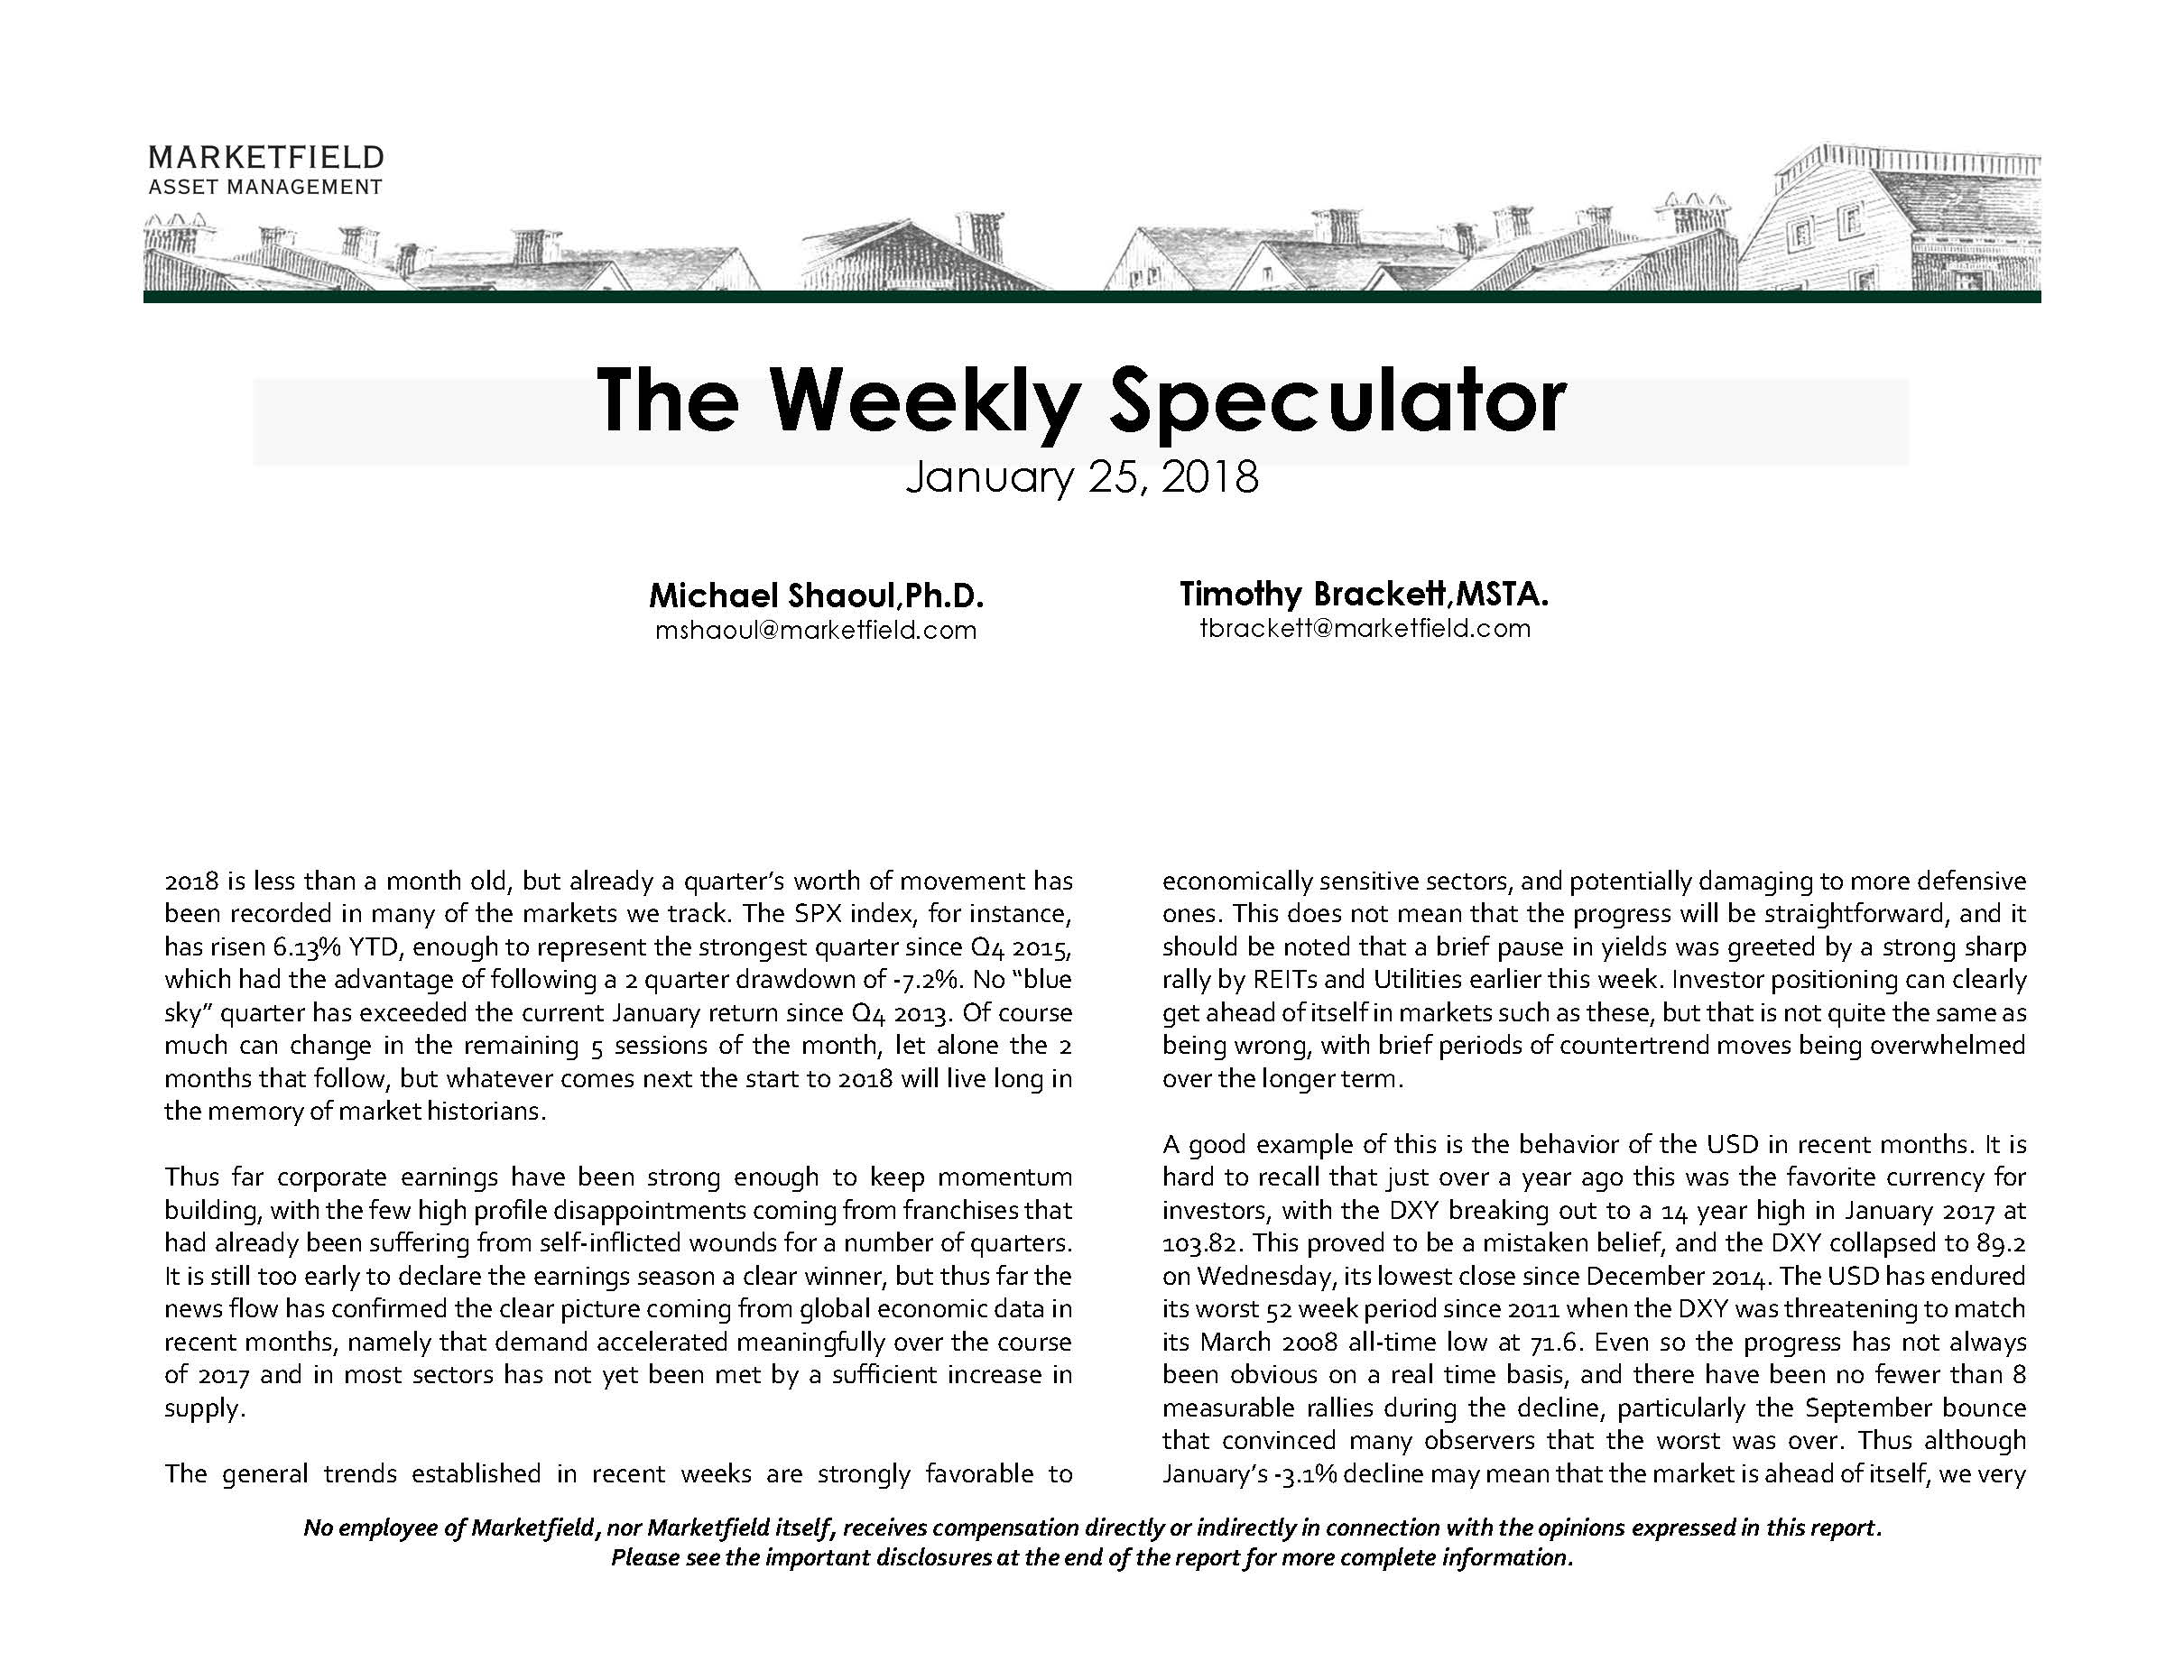 marketfield weekly speculator for 01-25-18_Page_01.jpg